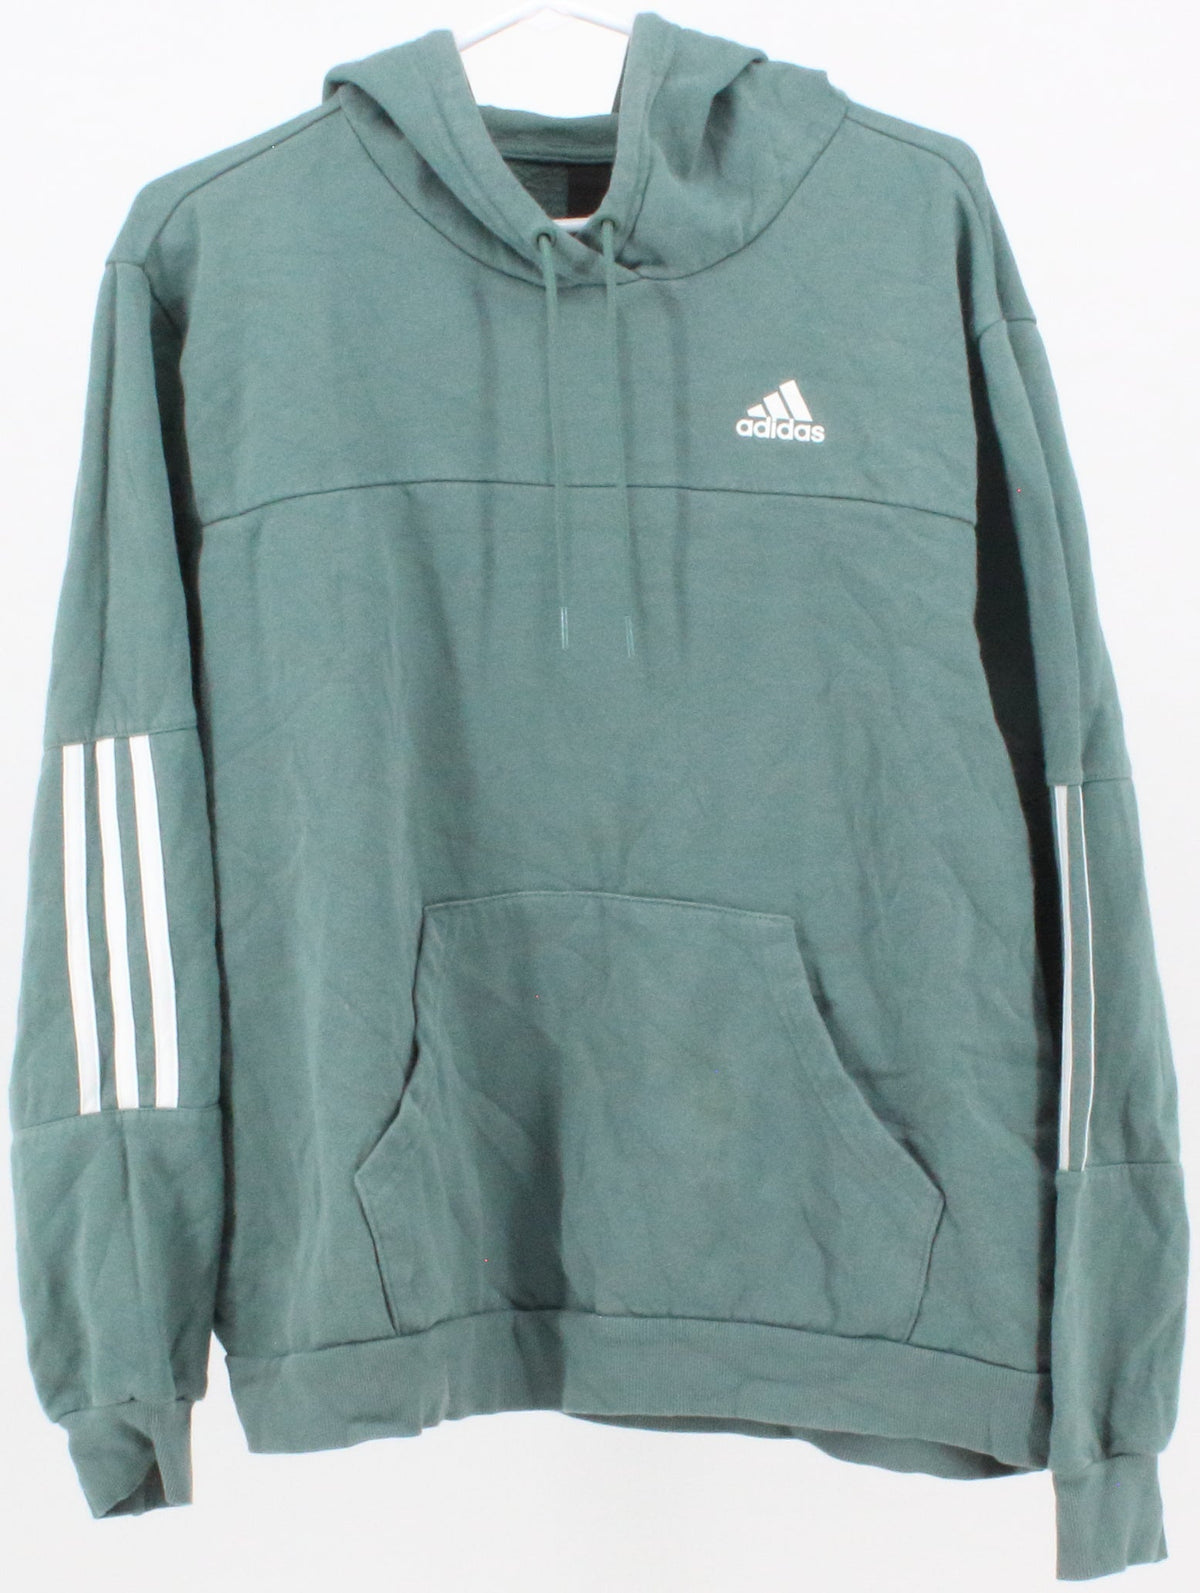 Adidas Green Hooded Sweatshirt With White Stripes